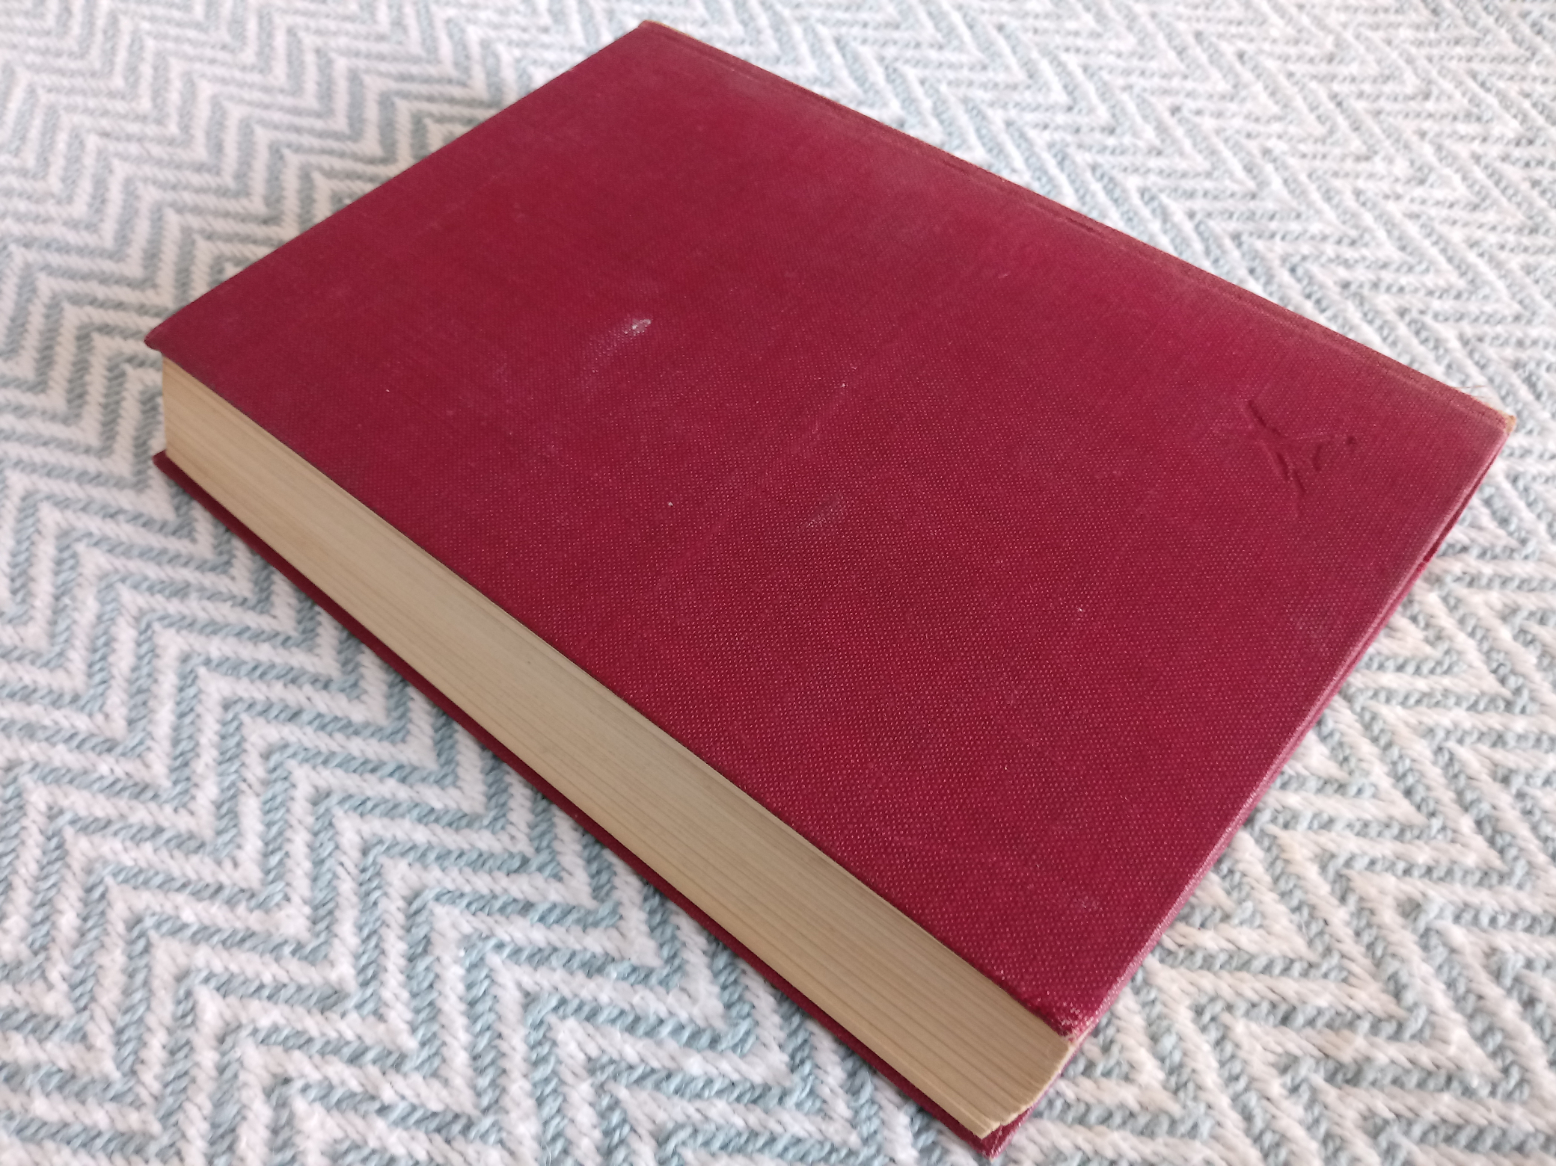 2 x Nevil Shute hardback books The Far Country 333 pages inscribed on inside page Published 1952 - Image 2 of 3